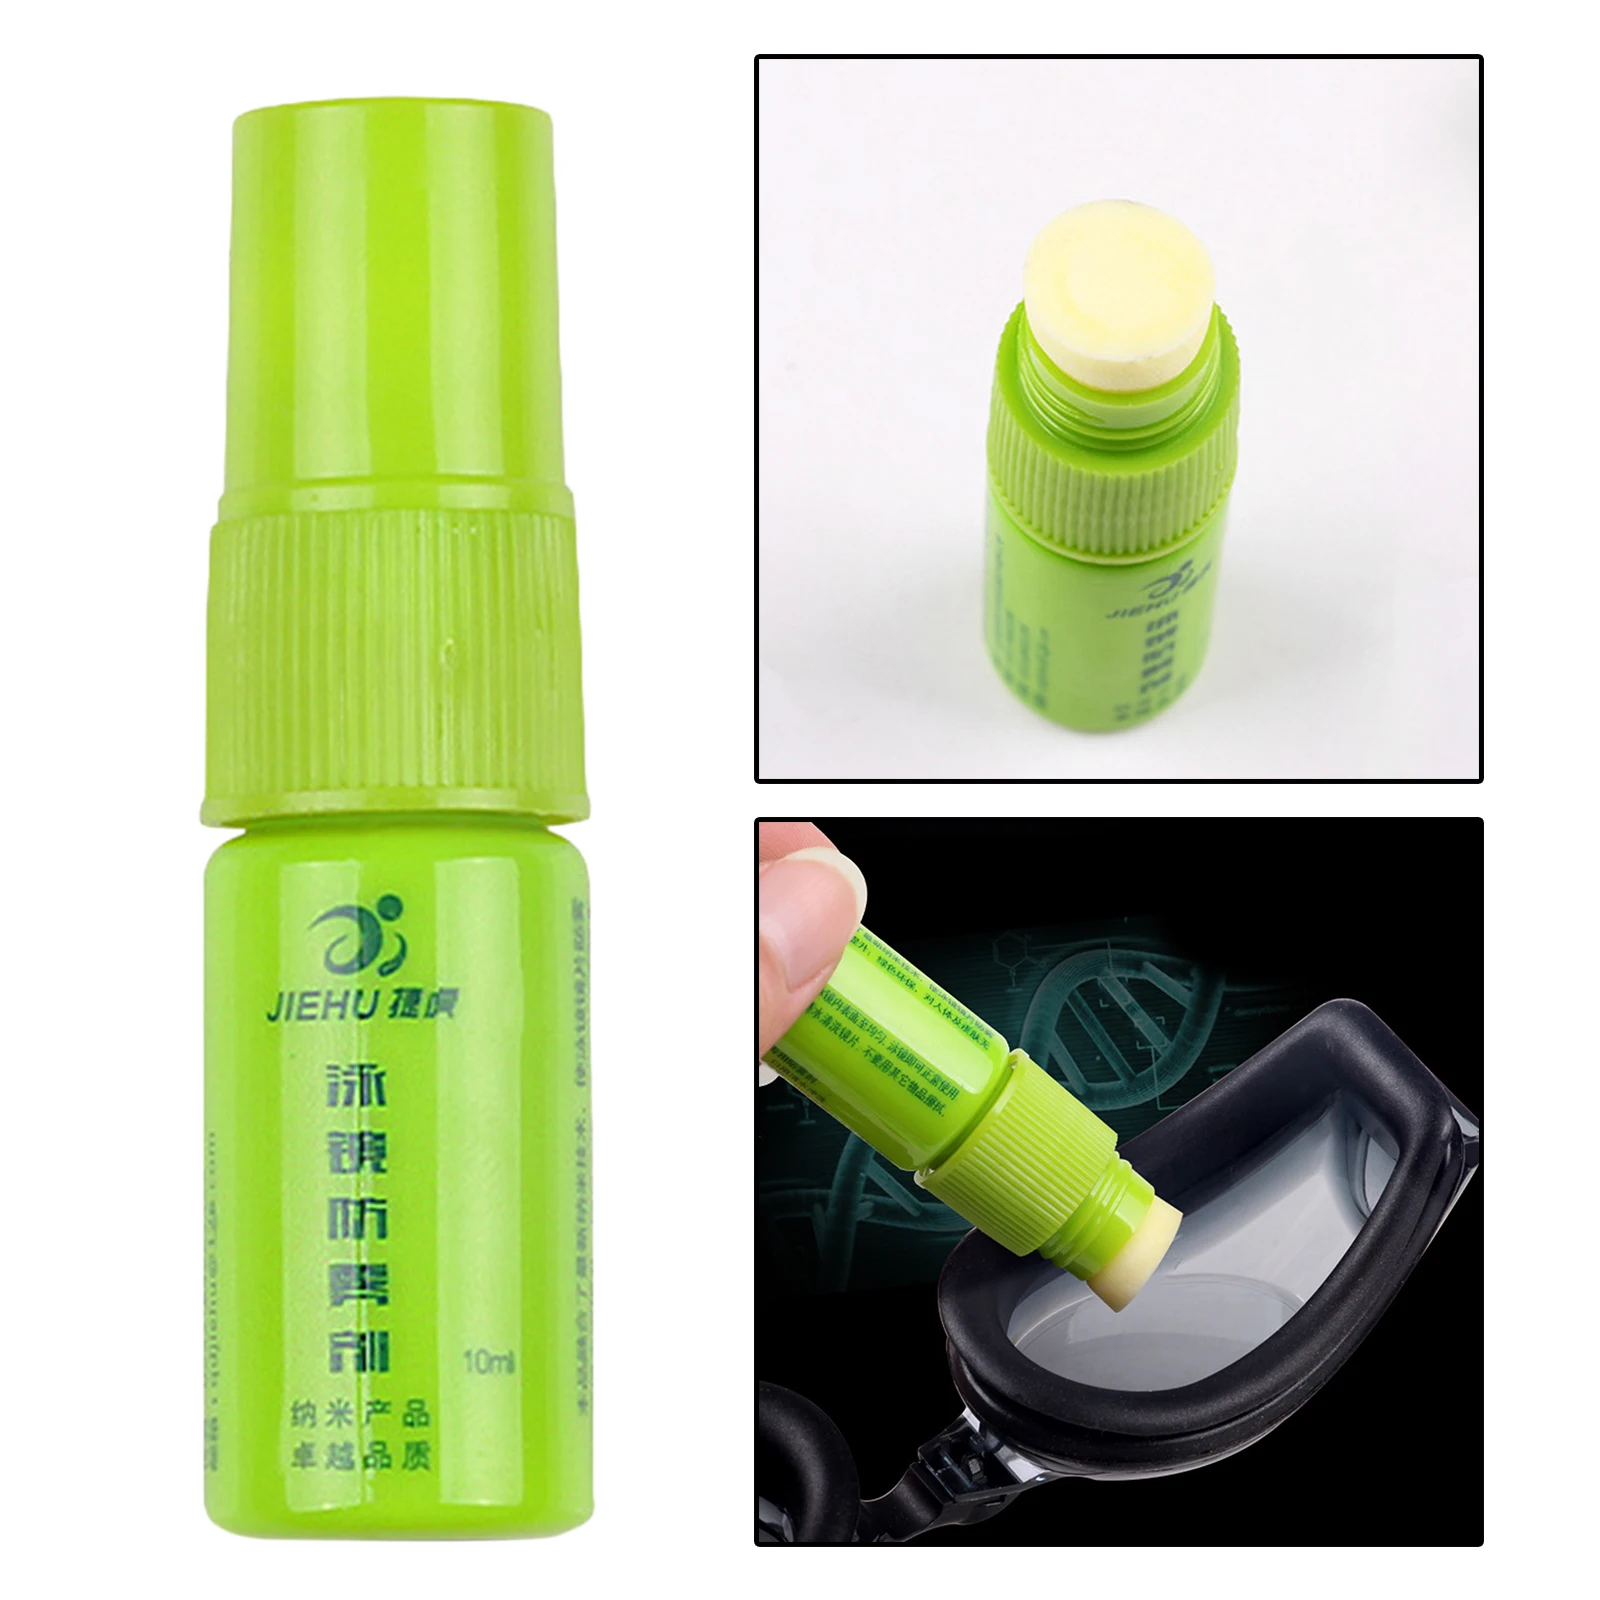 10ml Durable Solid State Nano Anti Fog Agent Defogger for Diving Mask Goggles Car Glass Swim Diving Goggles Glasses Accessories